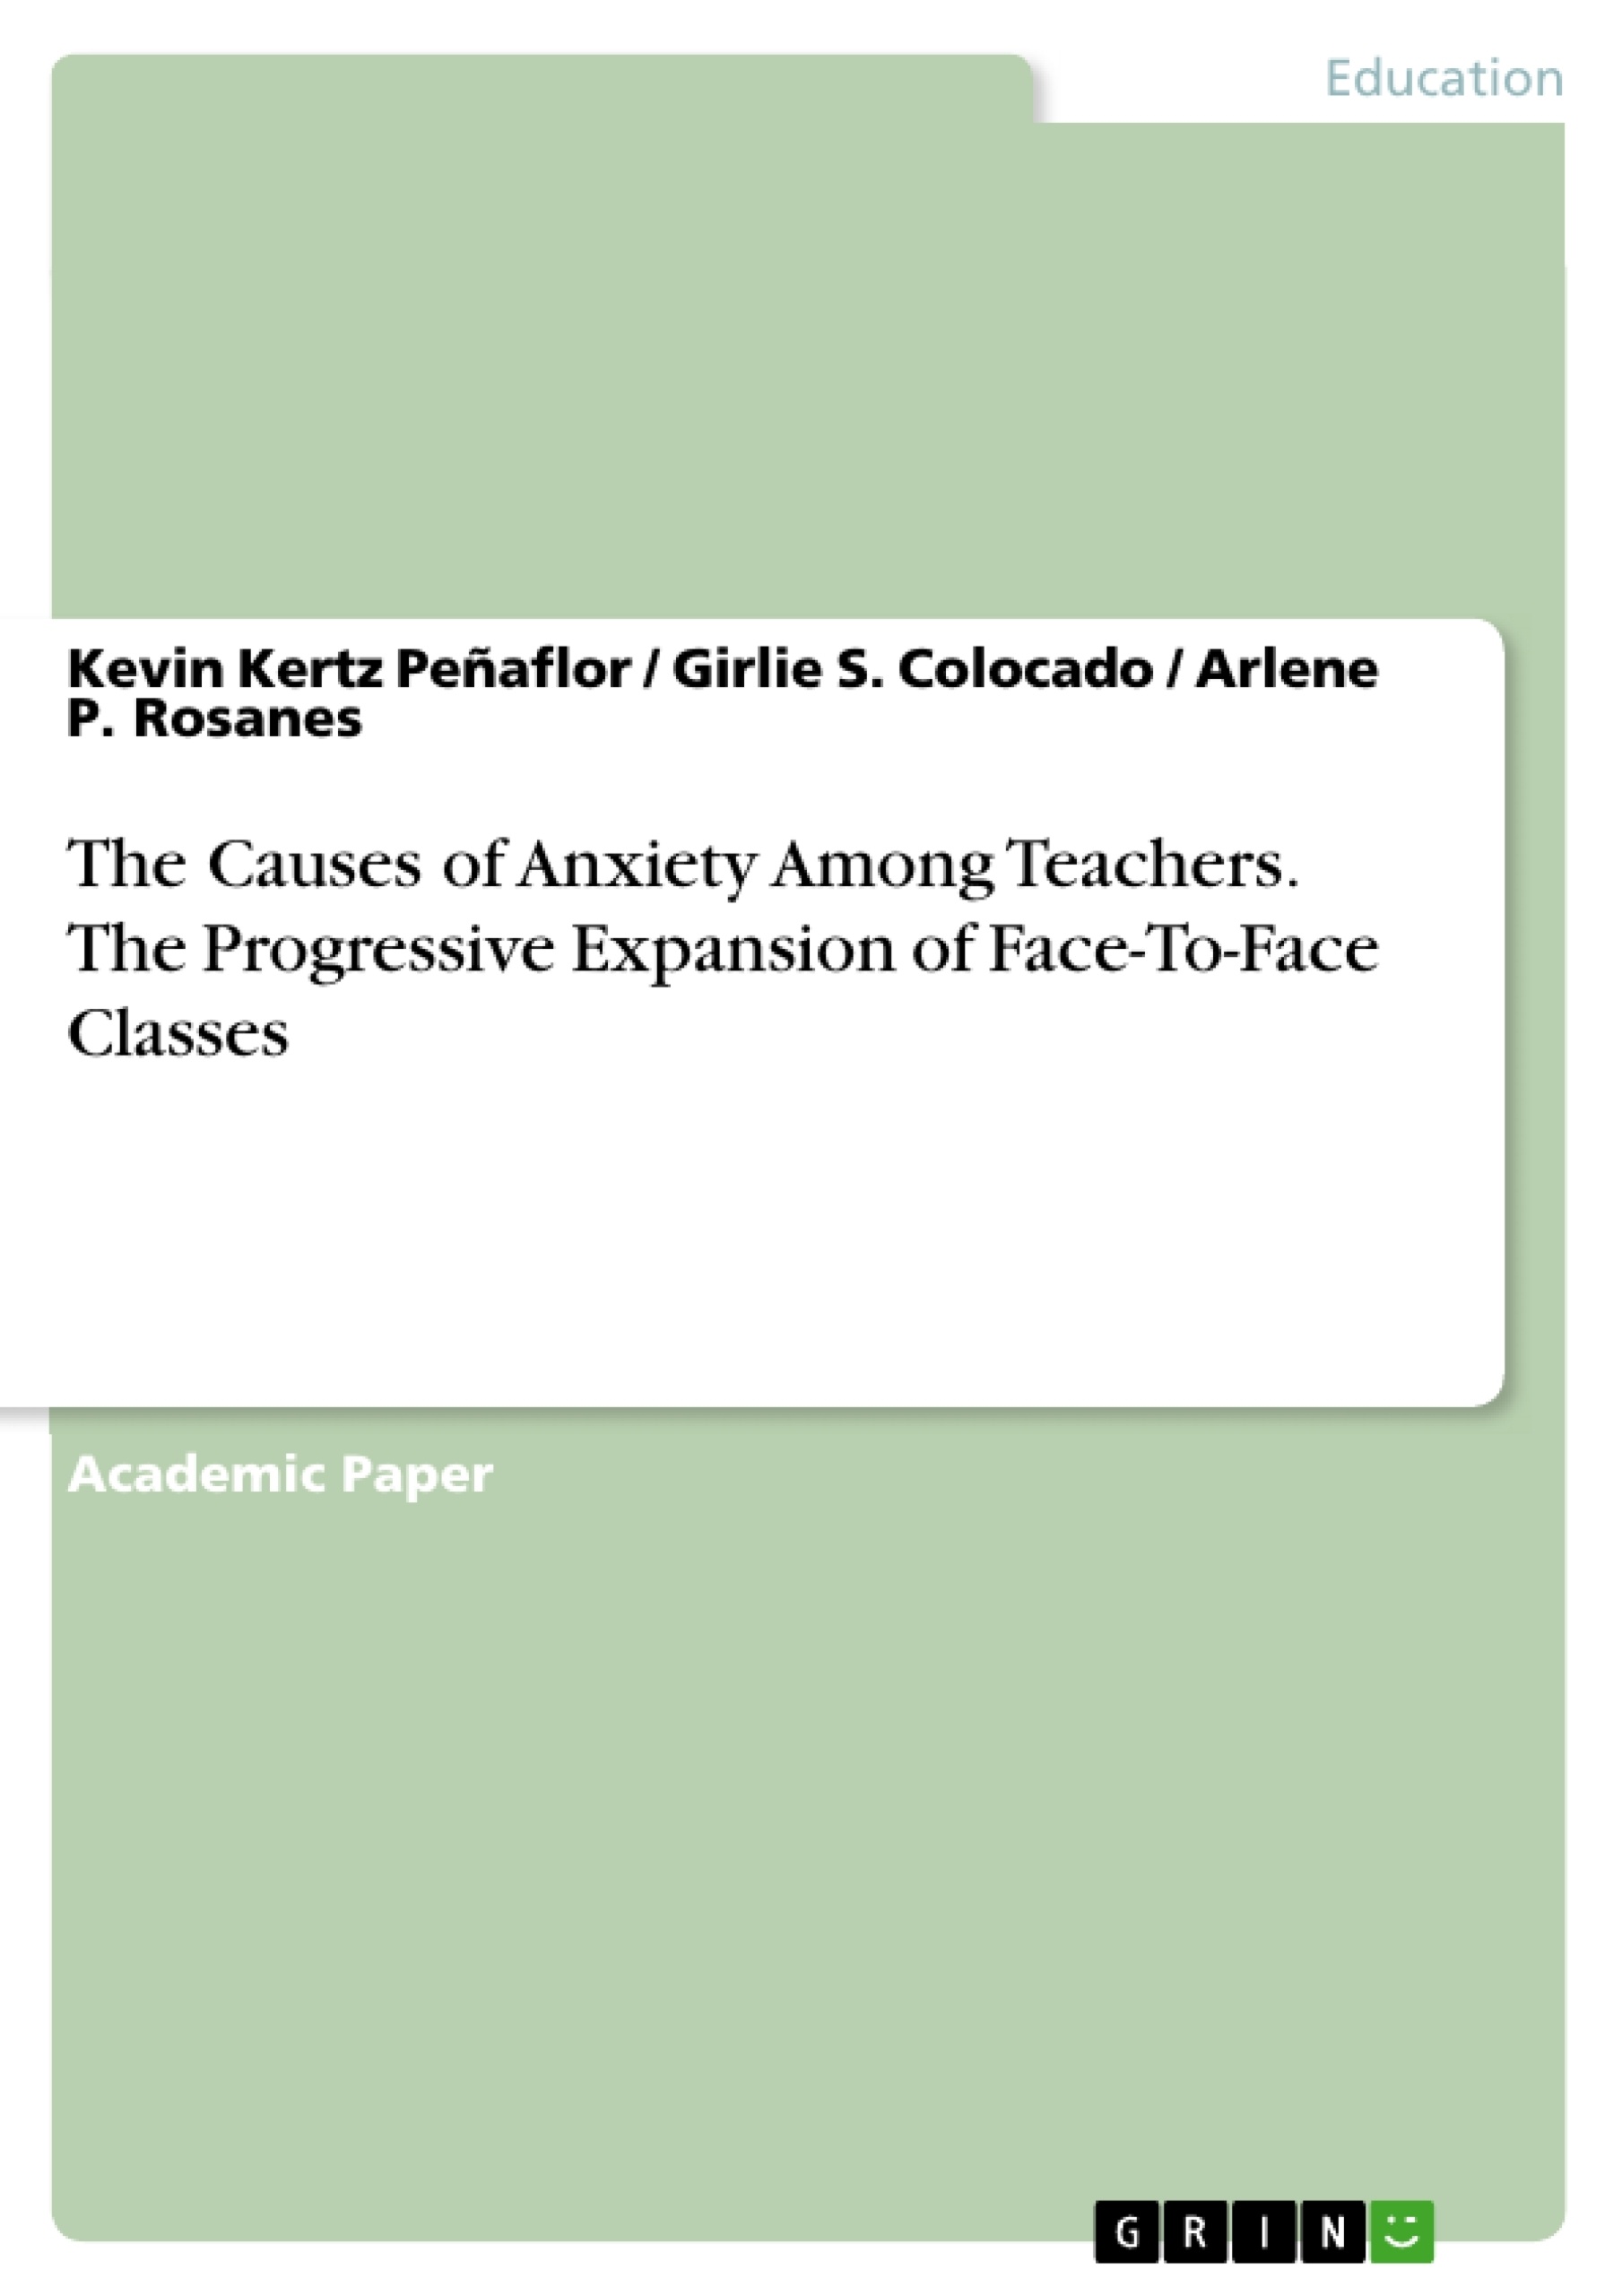 Title: The Causes of Anxiety Among Teachers. The Progressive Expansion of Face-To-Face Classes